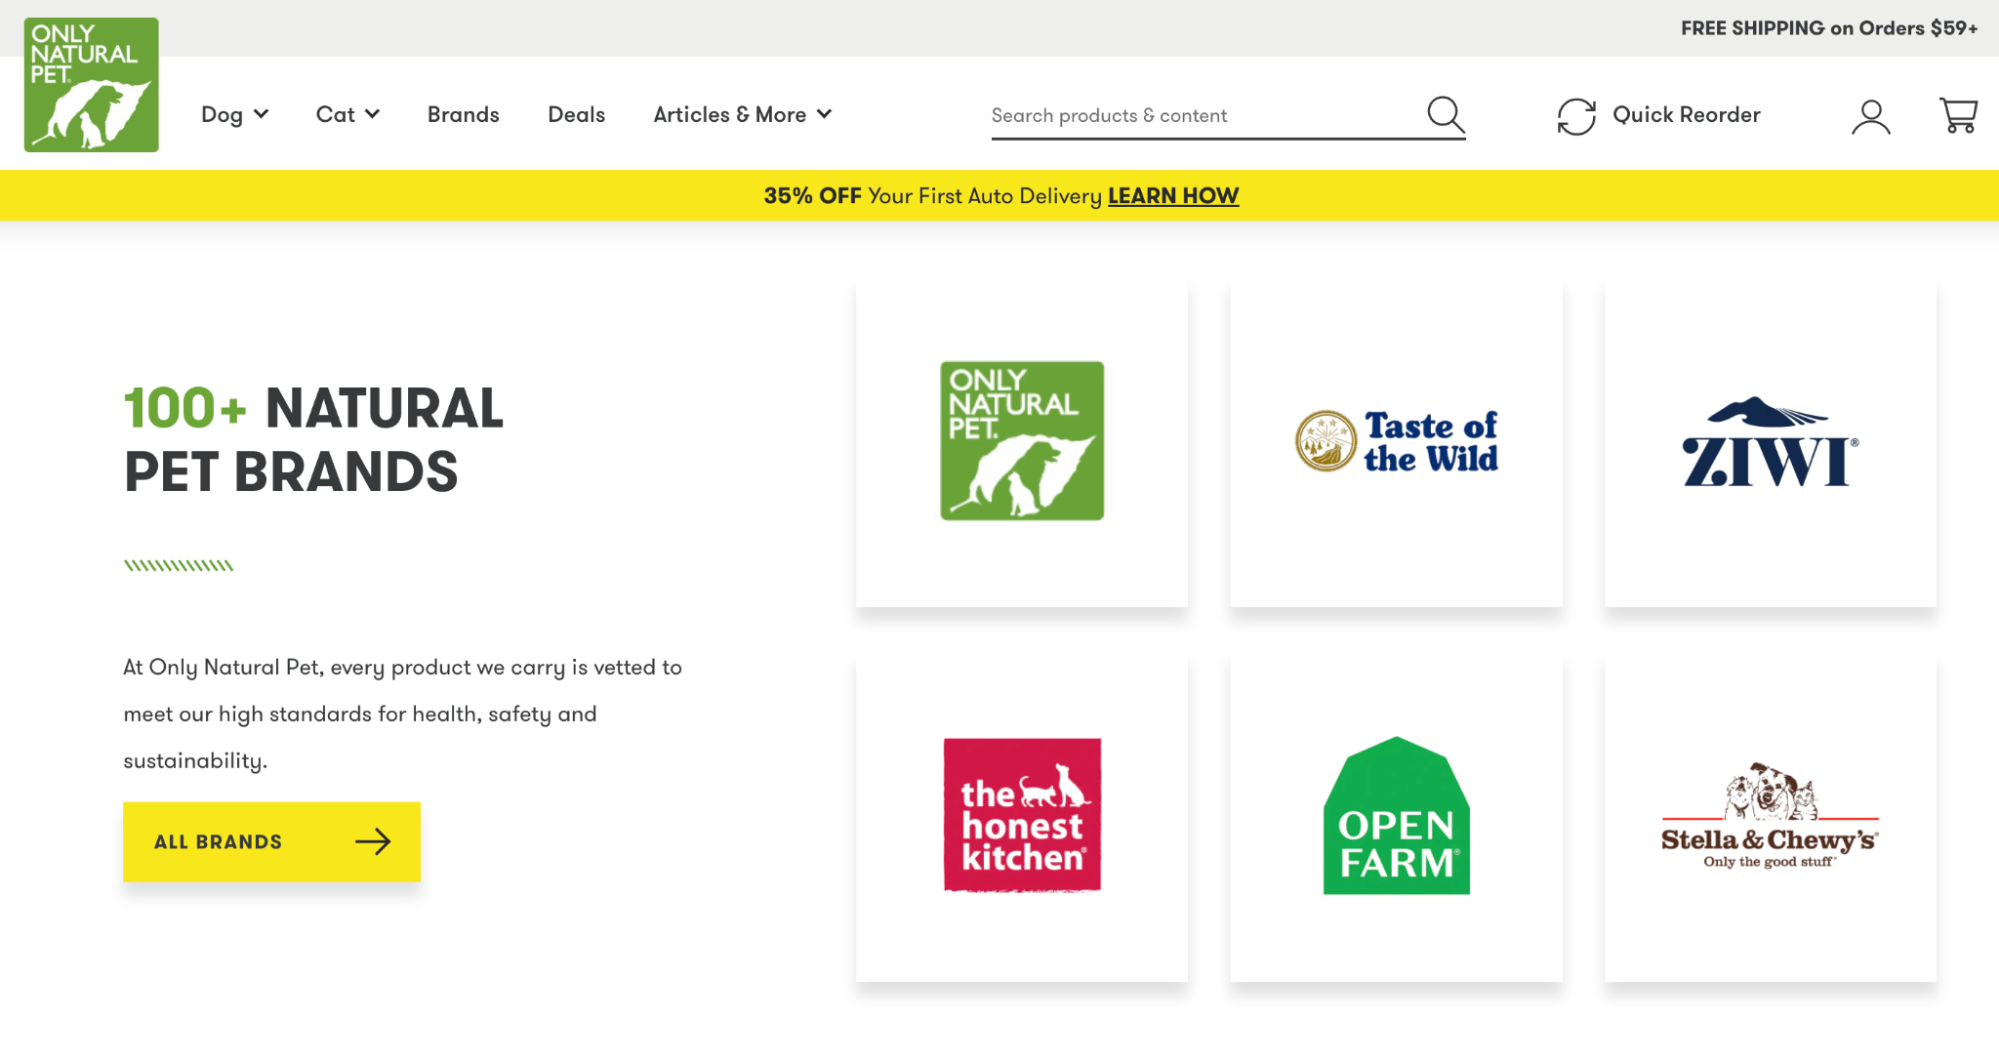 The homepage of pet accessories store Only Natural Pet promotes its strict product selection standards.